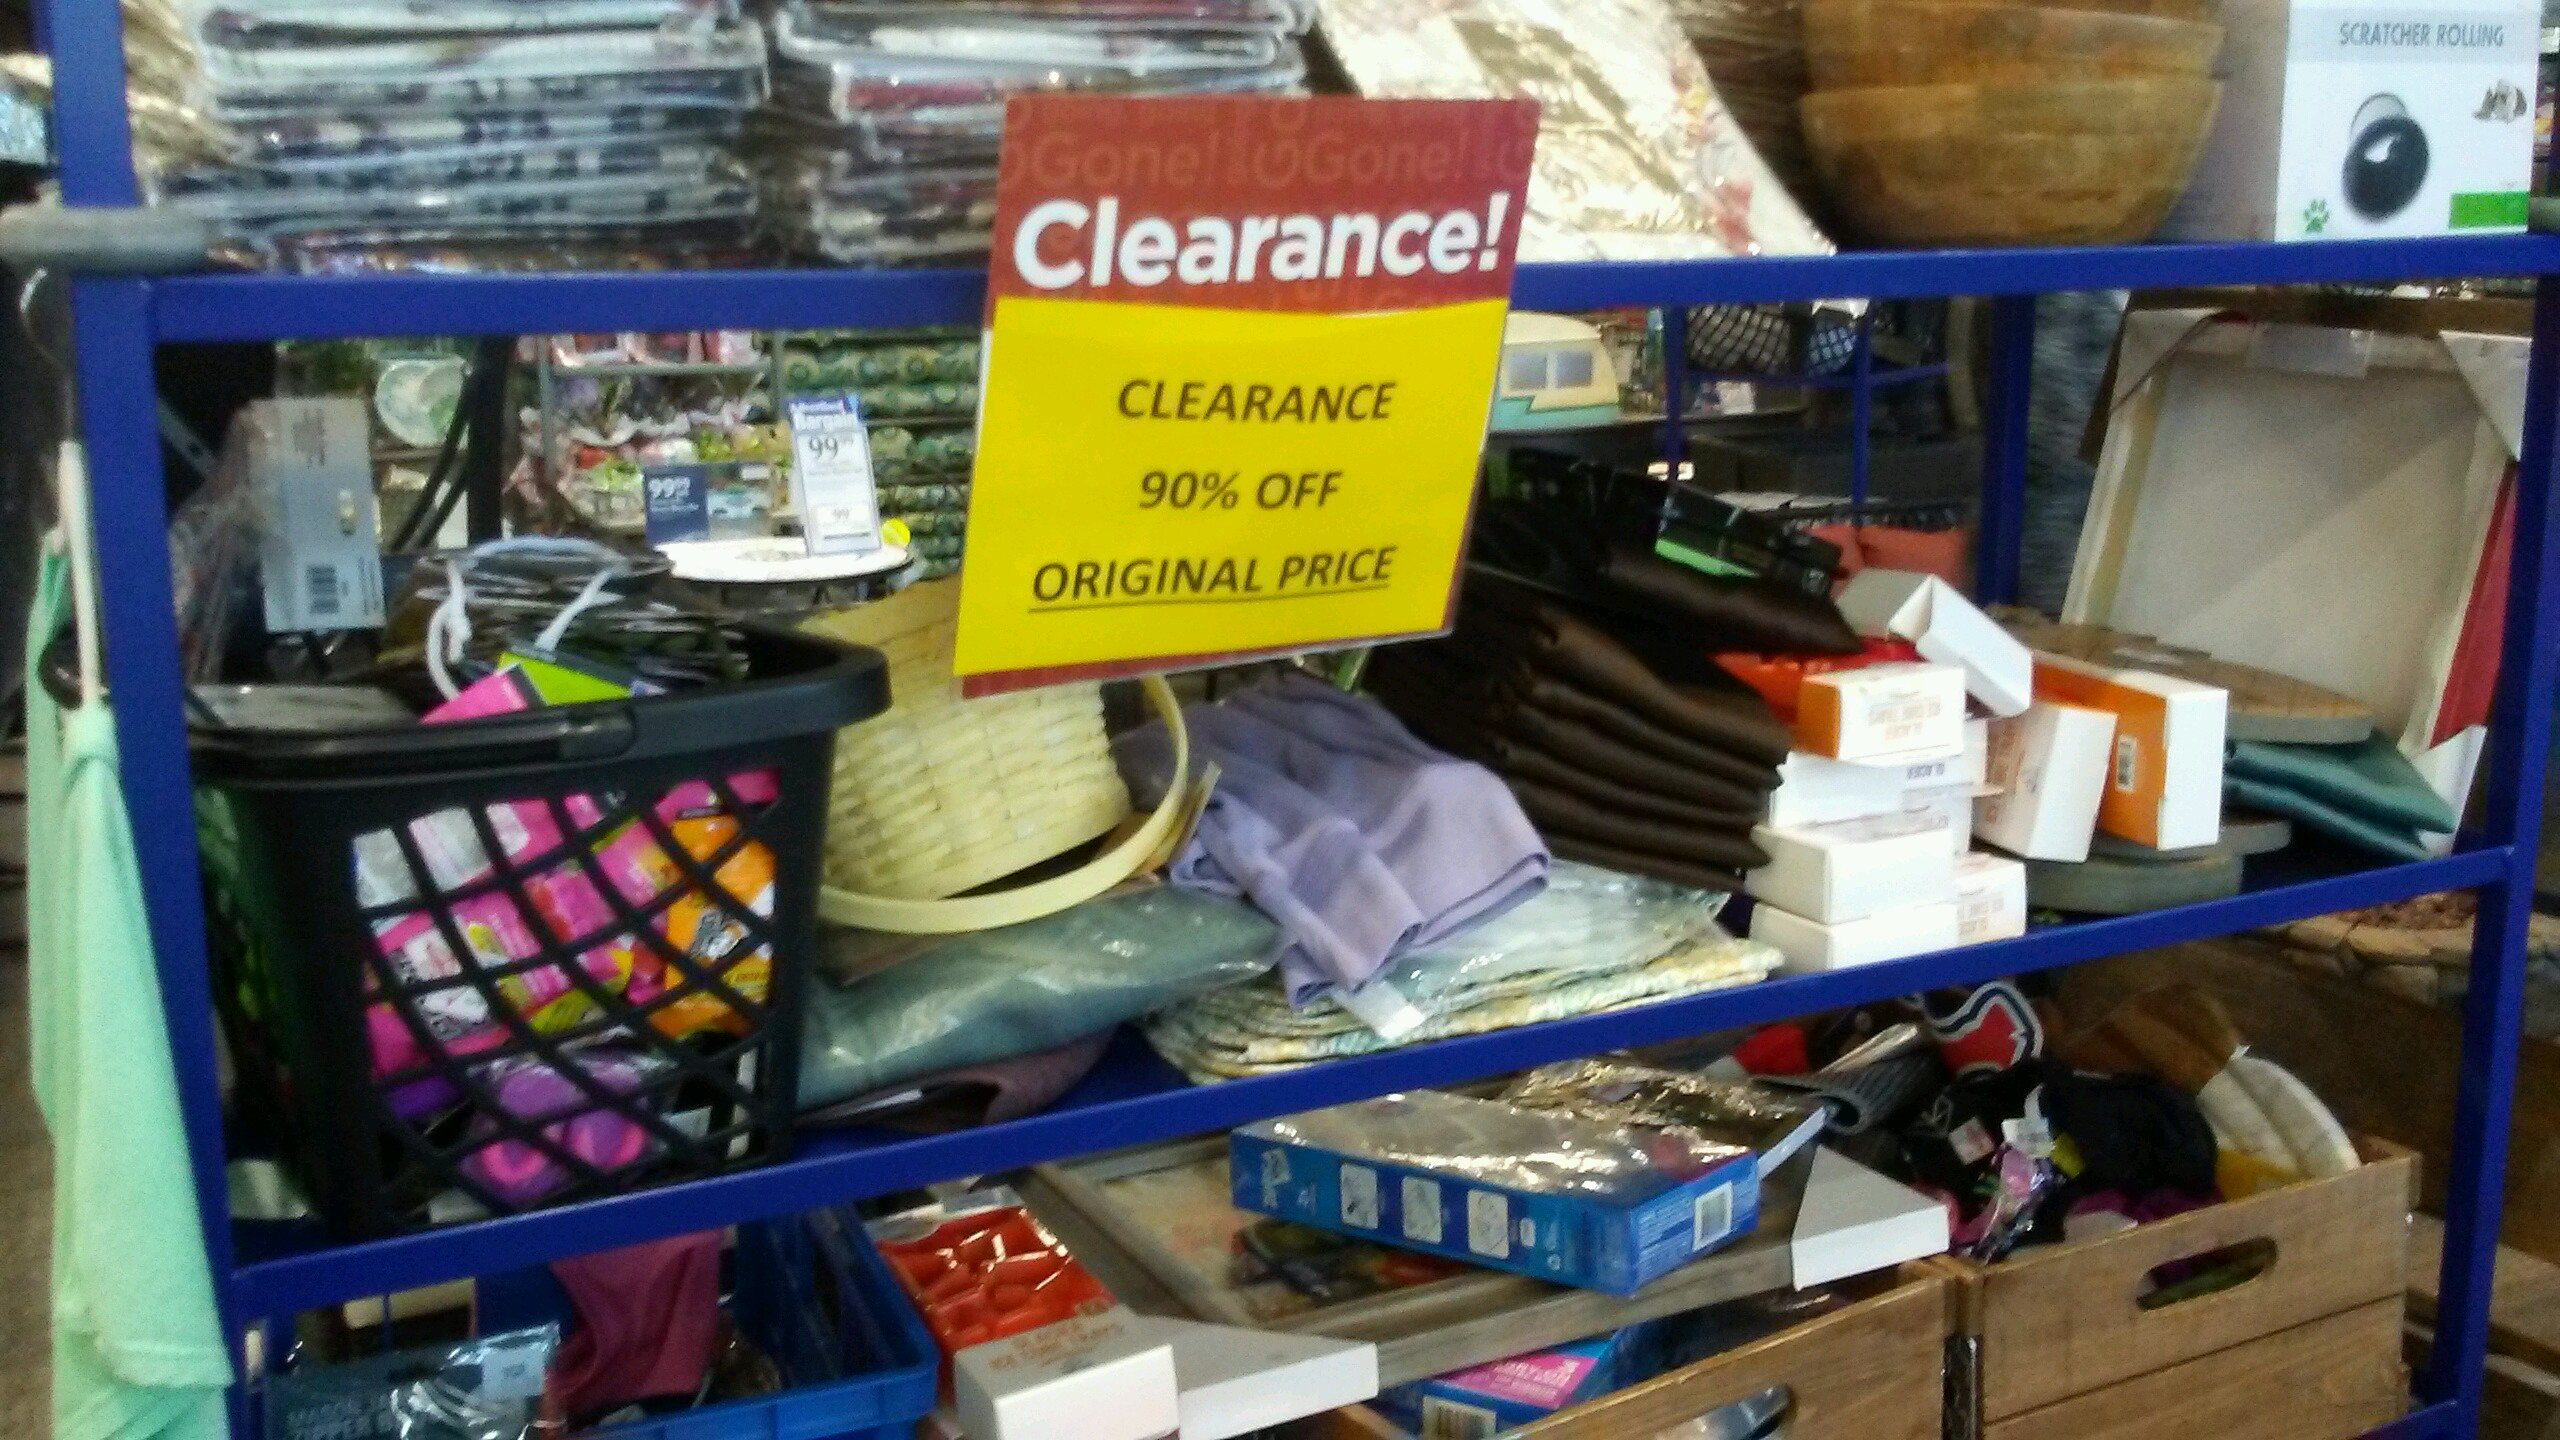 90% off clearance